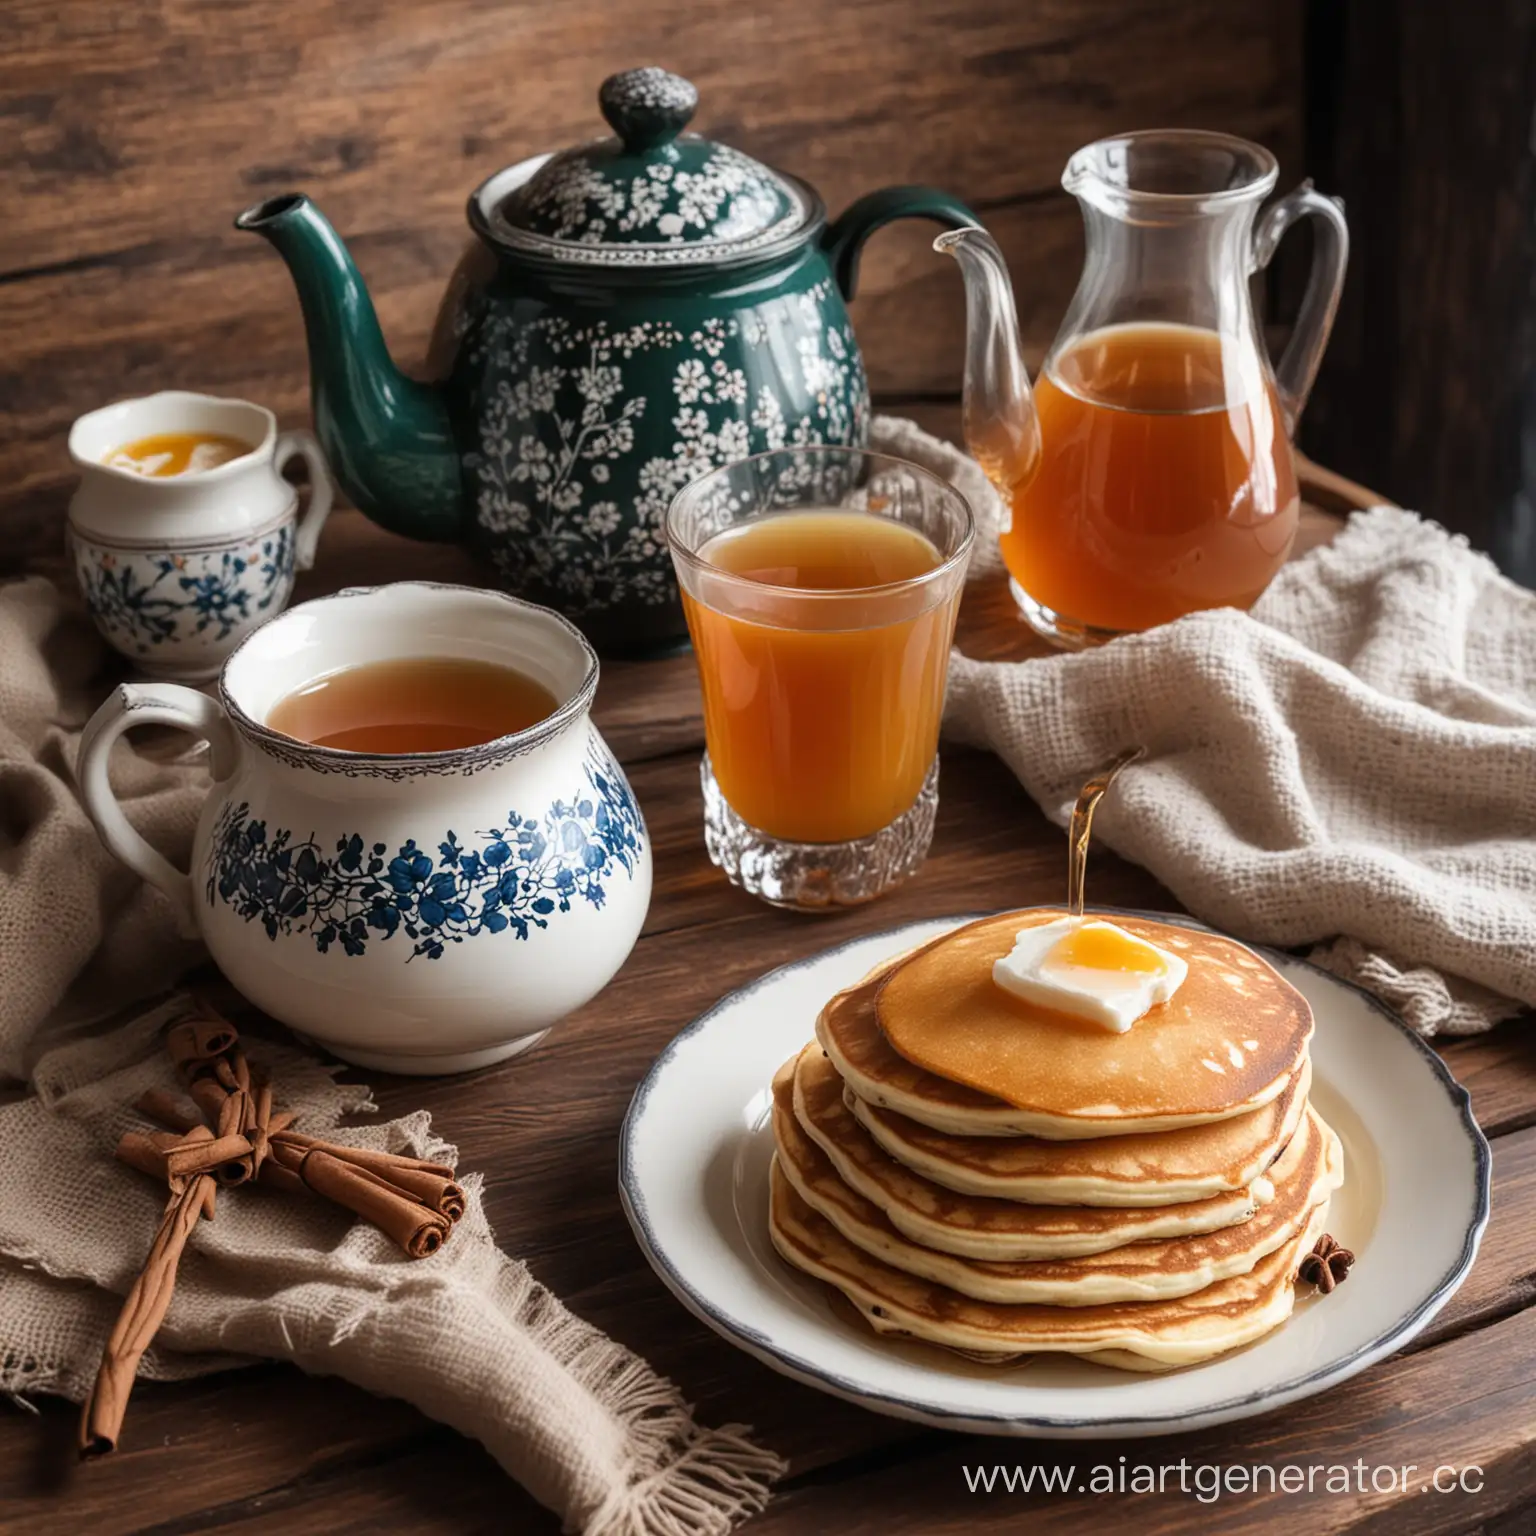 Cozy-Breakfast-Enjoying-Hot-Tea-and-Pancakes-in-a-Traditional-Russian-Izba